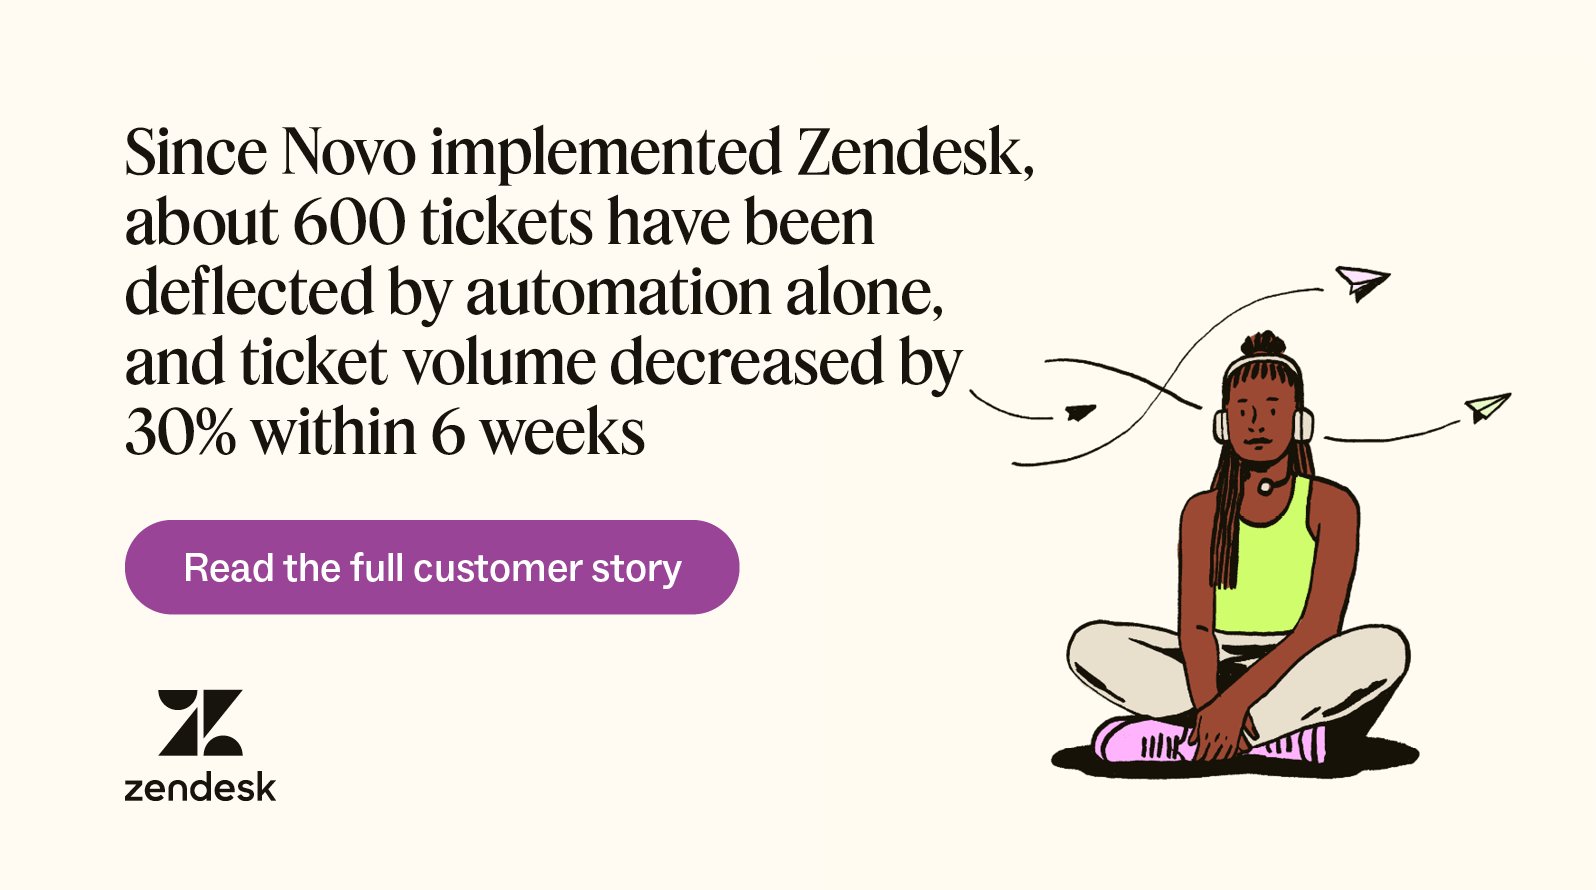 An illustration of a person sitting and wearing headphones shares how Novo benefits from using Zendesk ticketing systems.